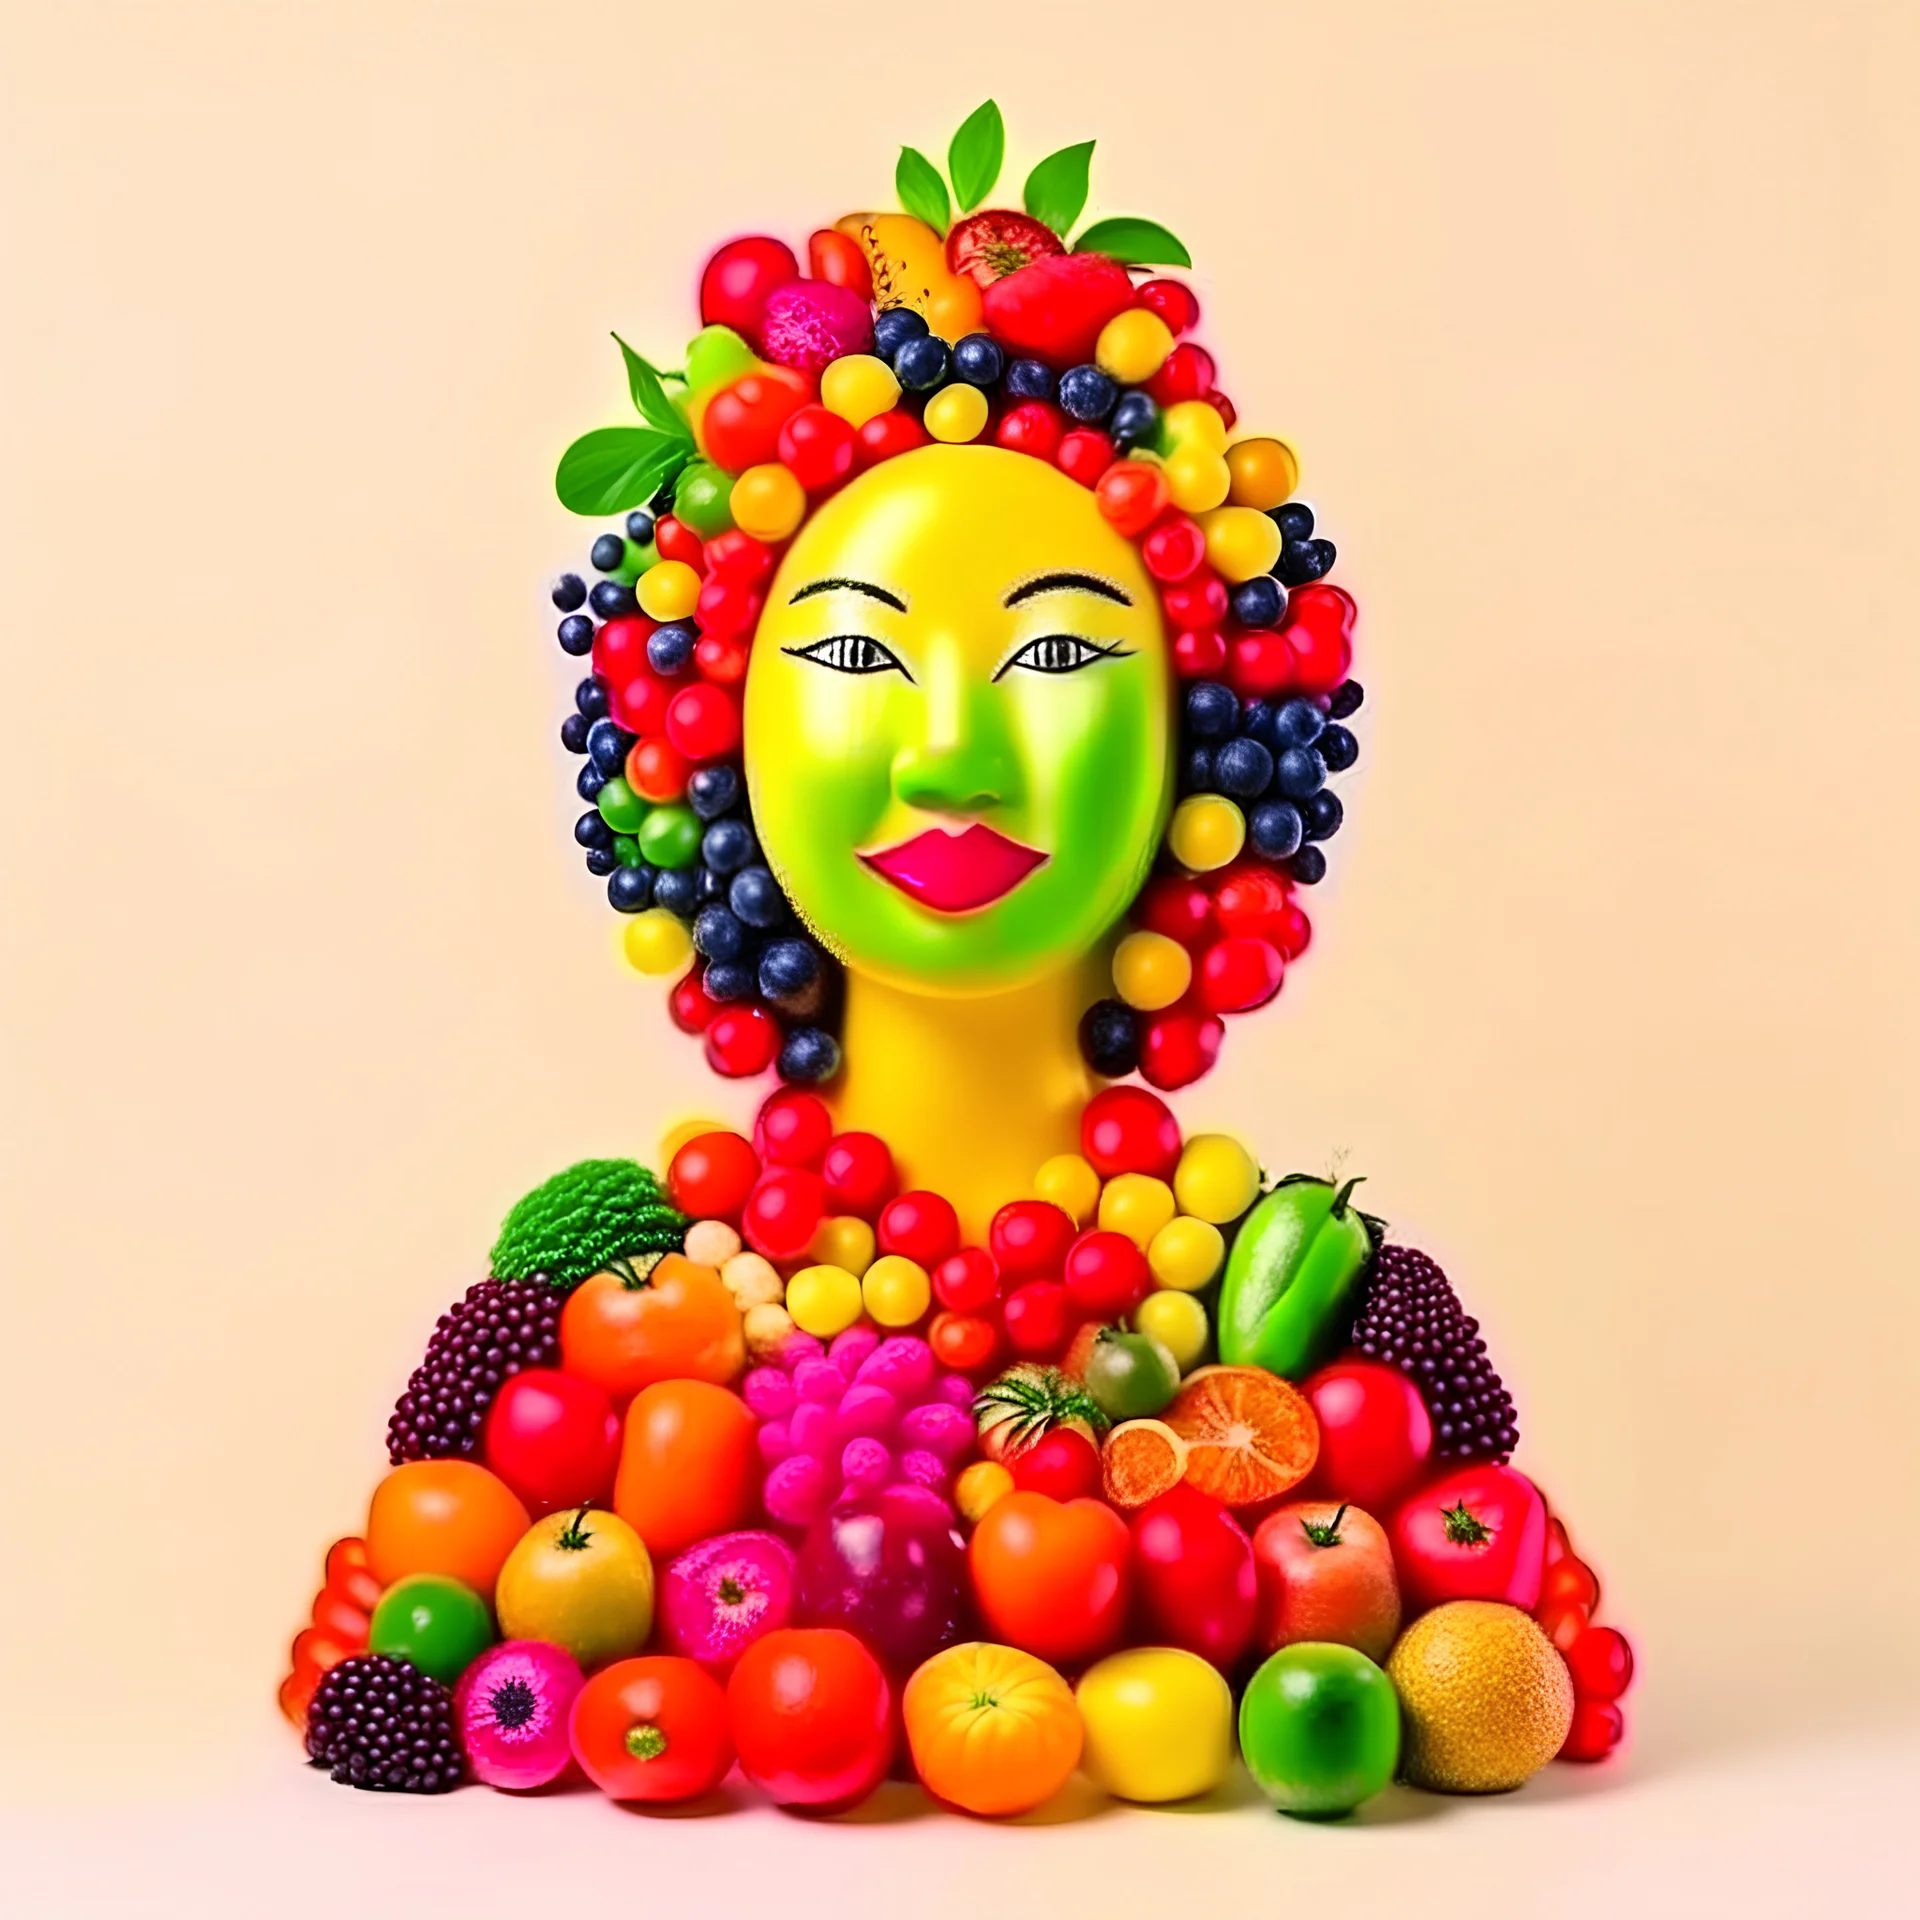 Woman made of fruits and vegetables